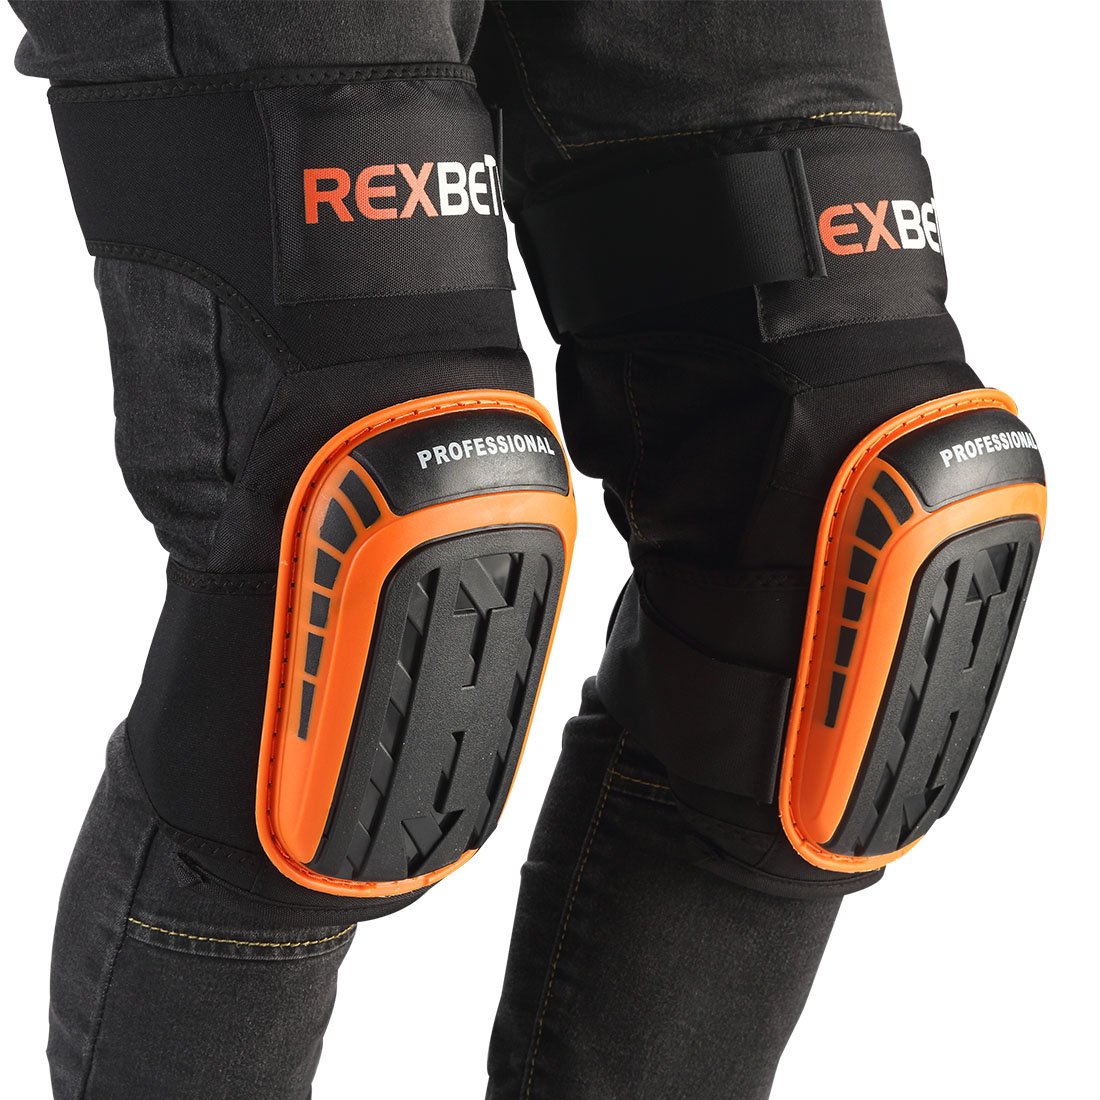 REXBETI Knee Pads for Work, Construction Gel Knee Pads Tools, Heavy Duty Comfortable Anti-slip Foam Knee Pads for Cleaning Flooring and Garden,